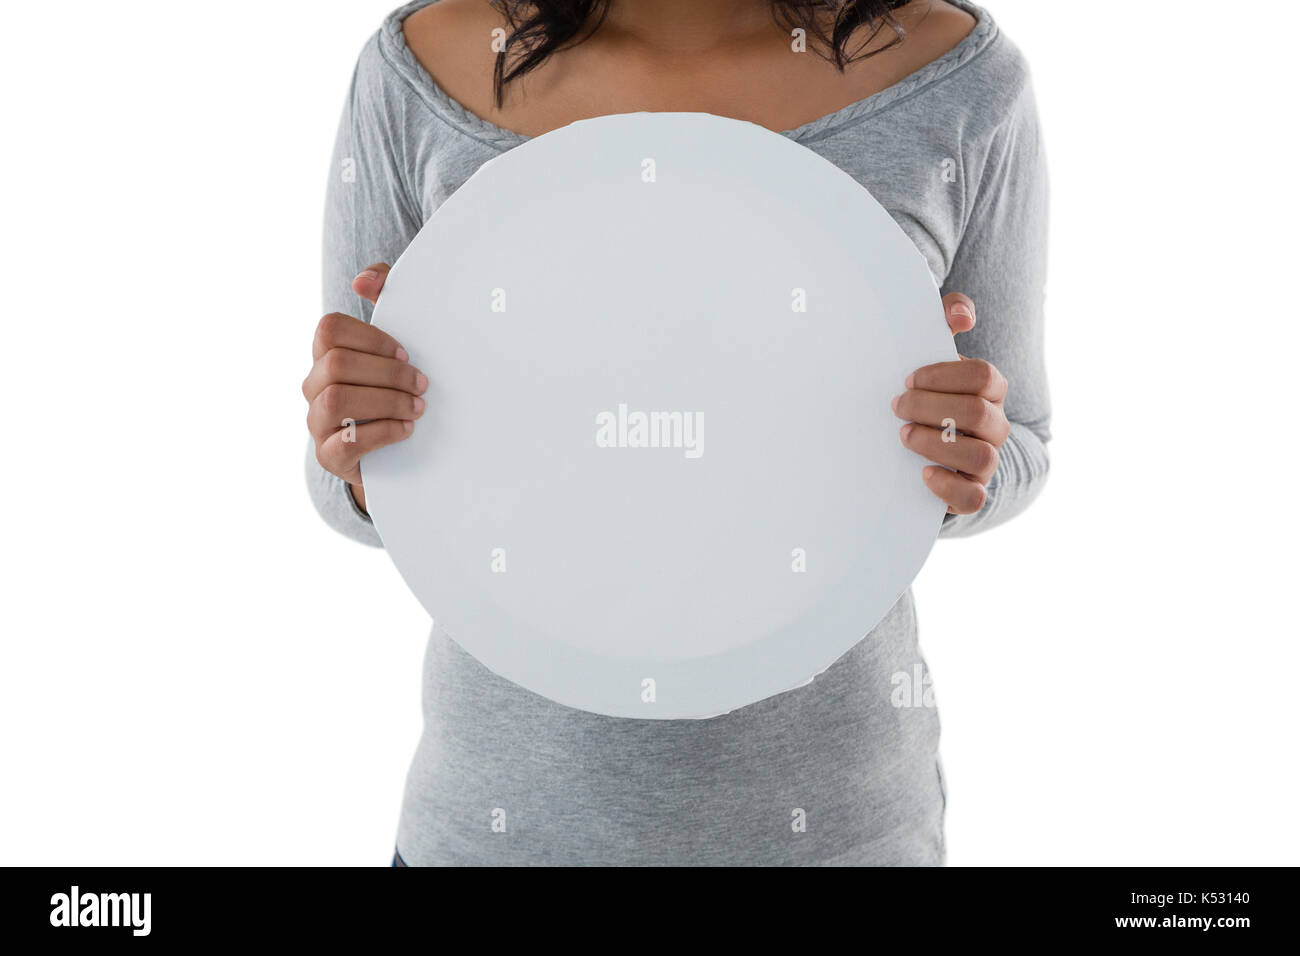 Mid section of woman holding circle shaped placard against white background Stock Photo